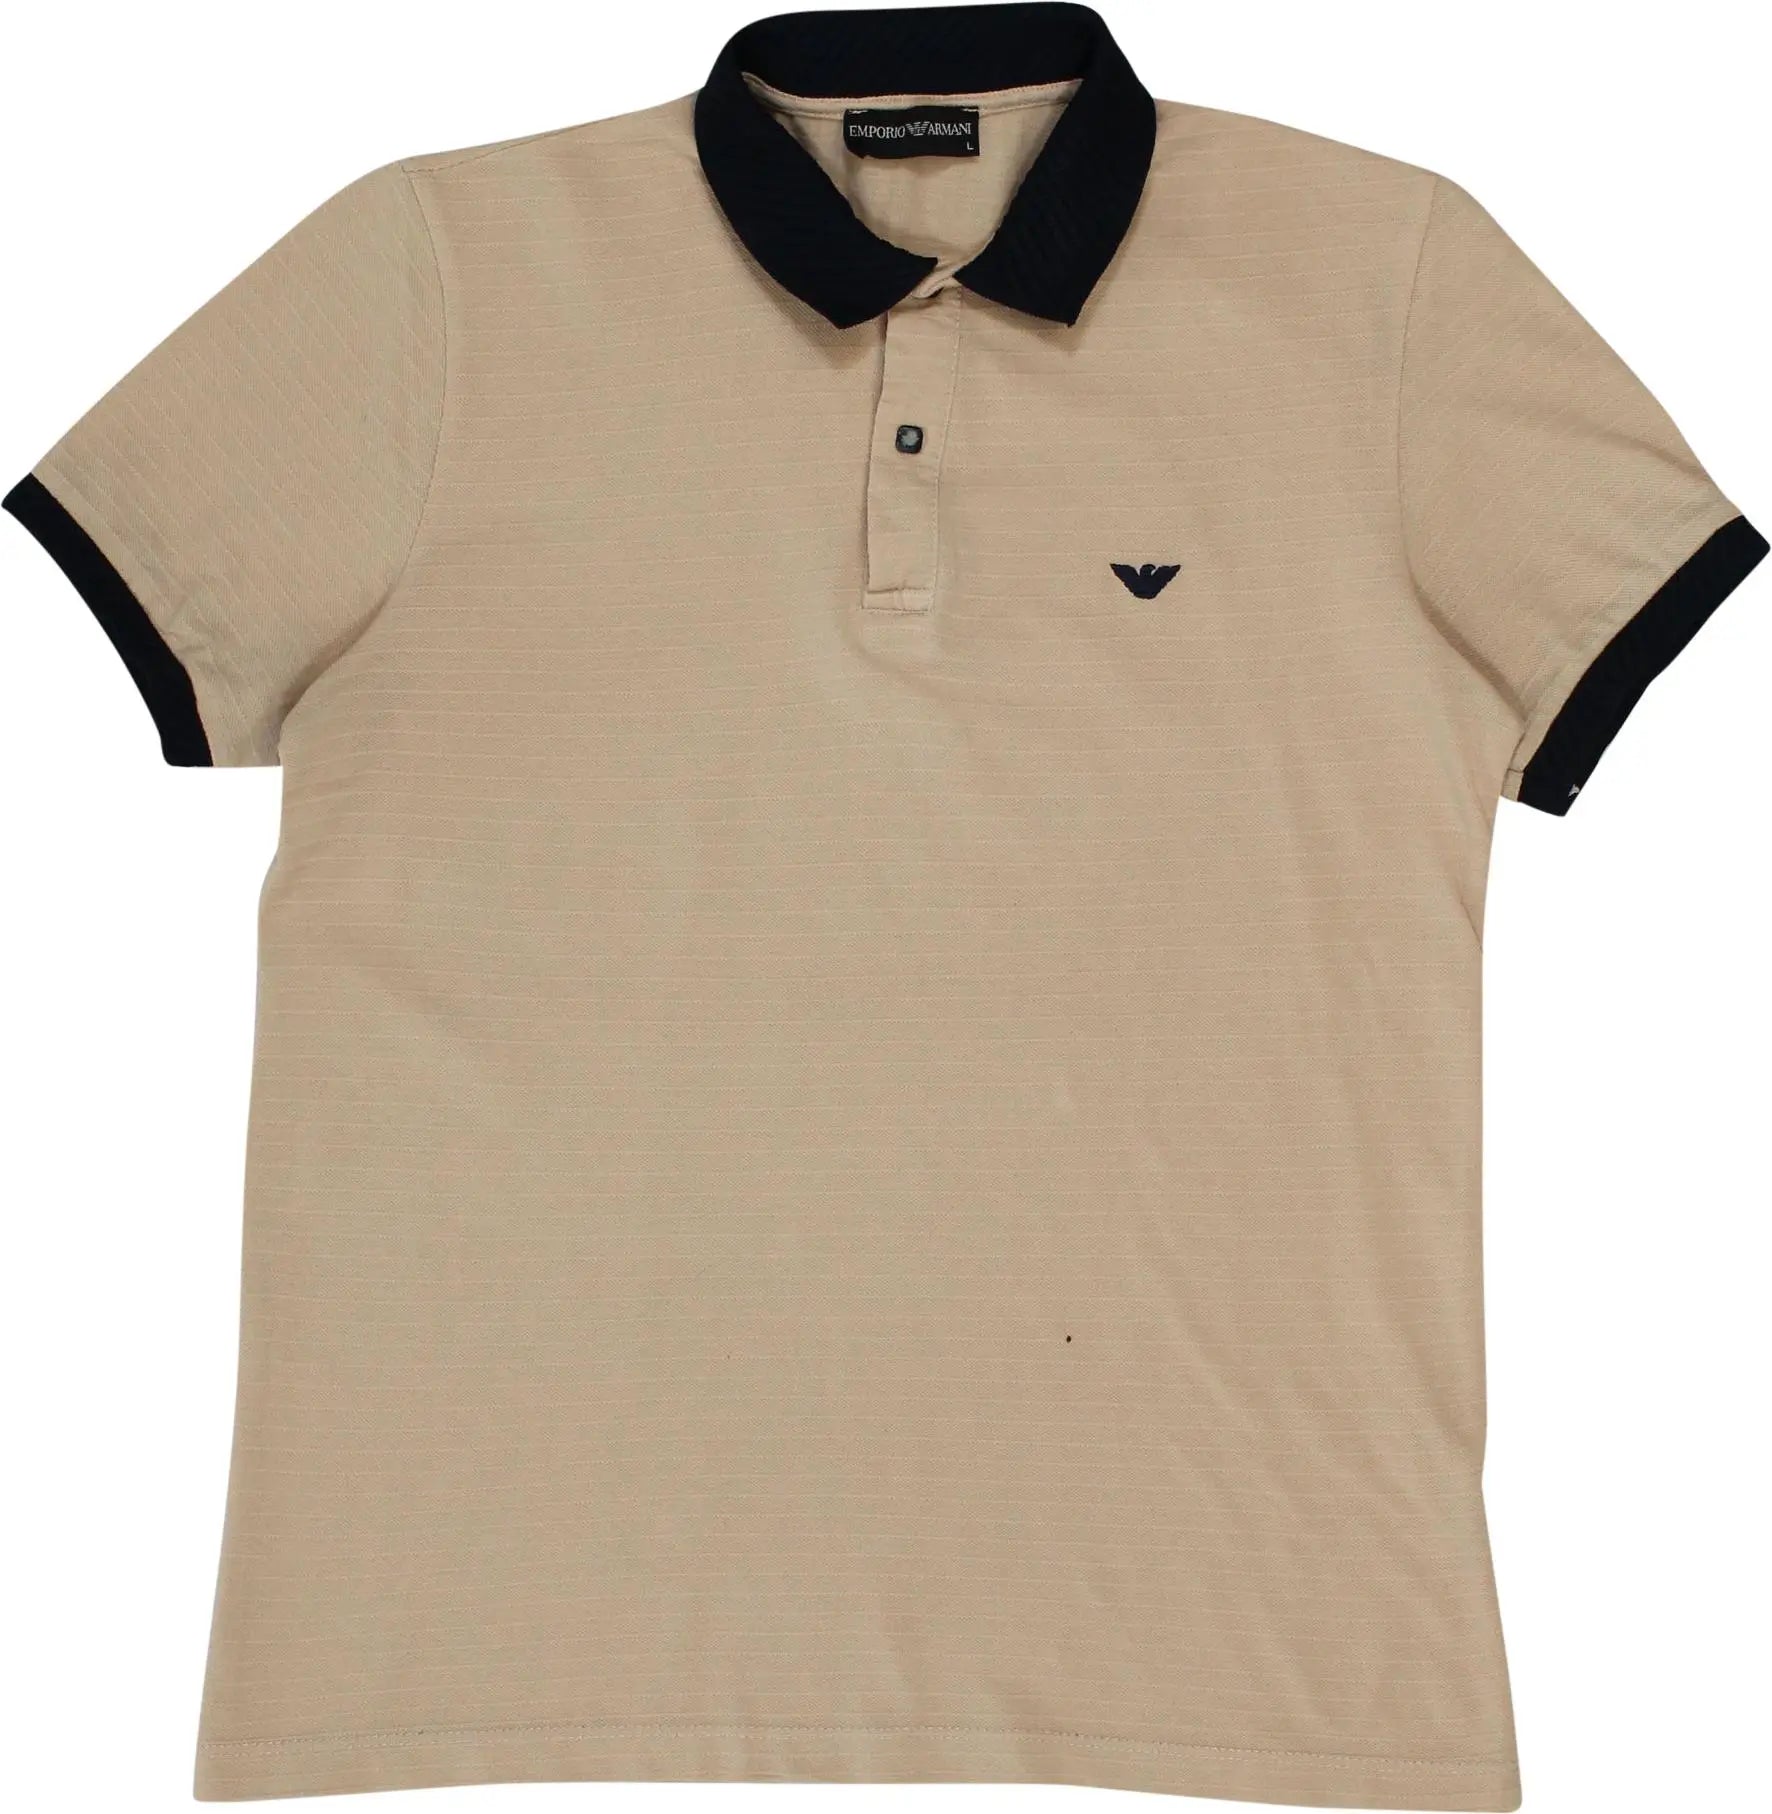 Emporio Armani - Polo Shirt by Emporio Armani- ThriftTale.com - Vintage and second handclothing